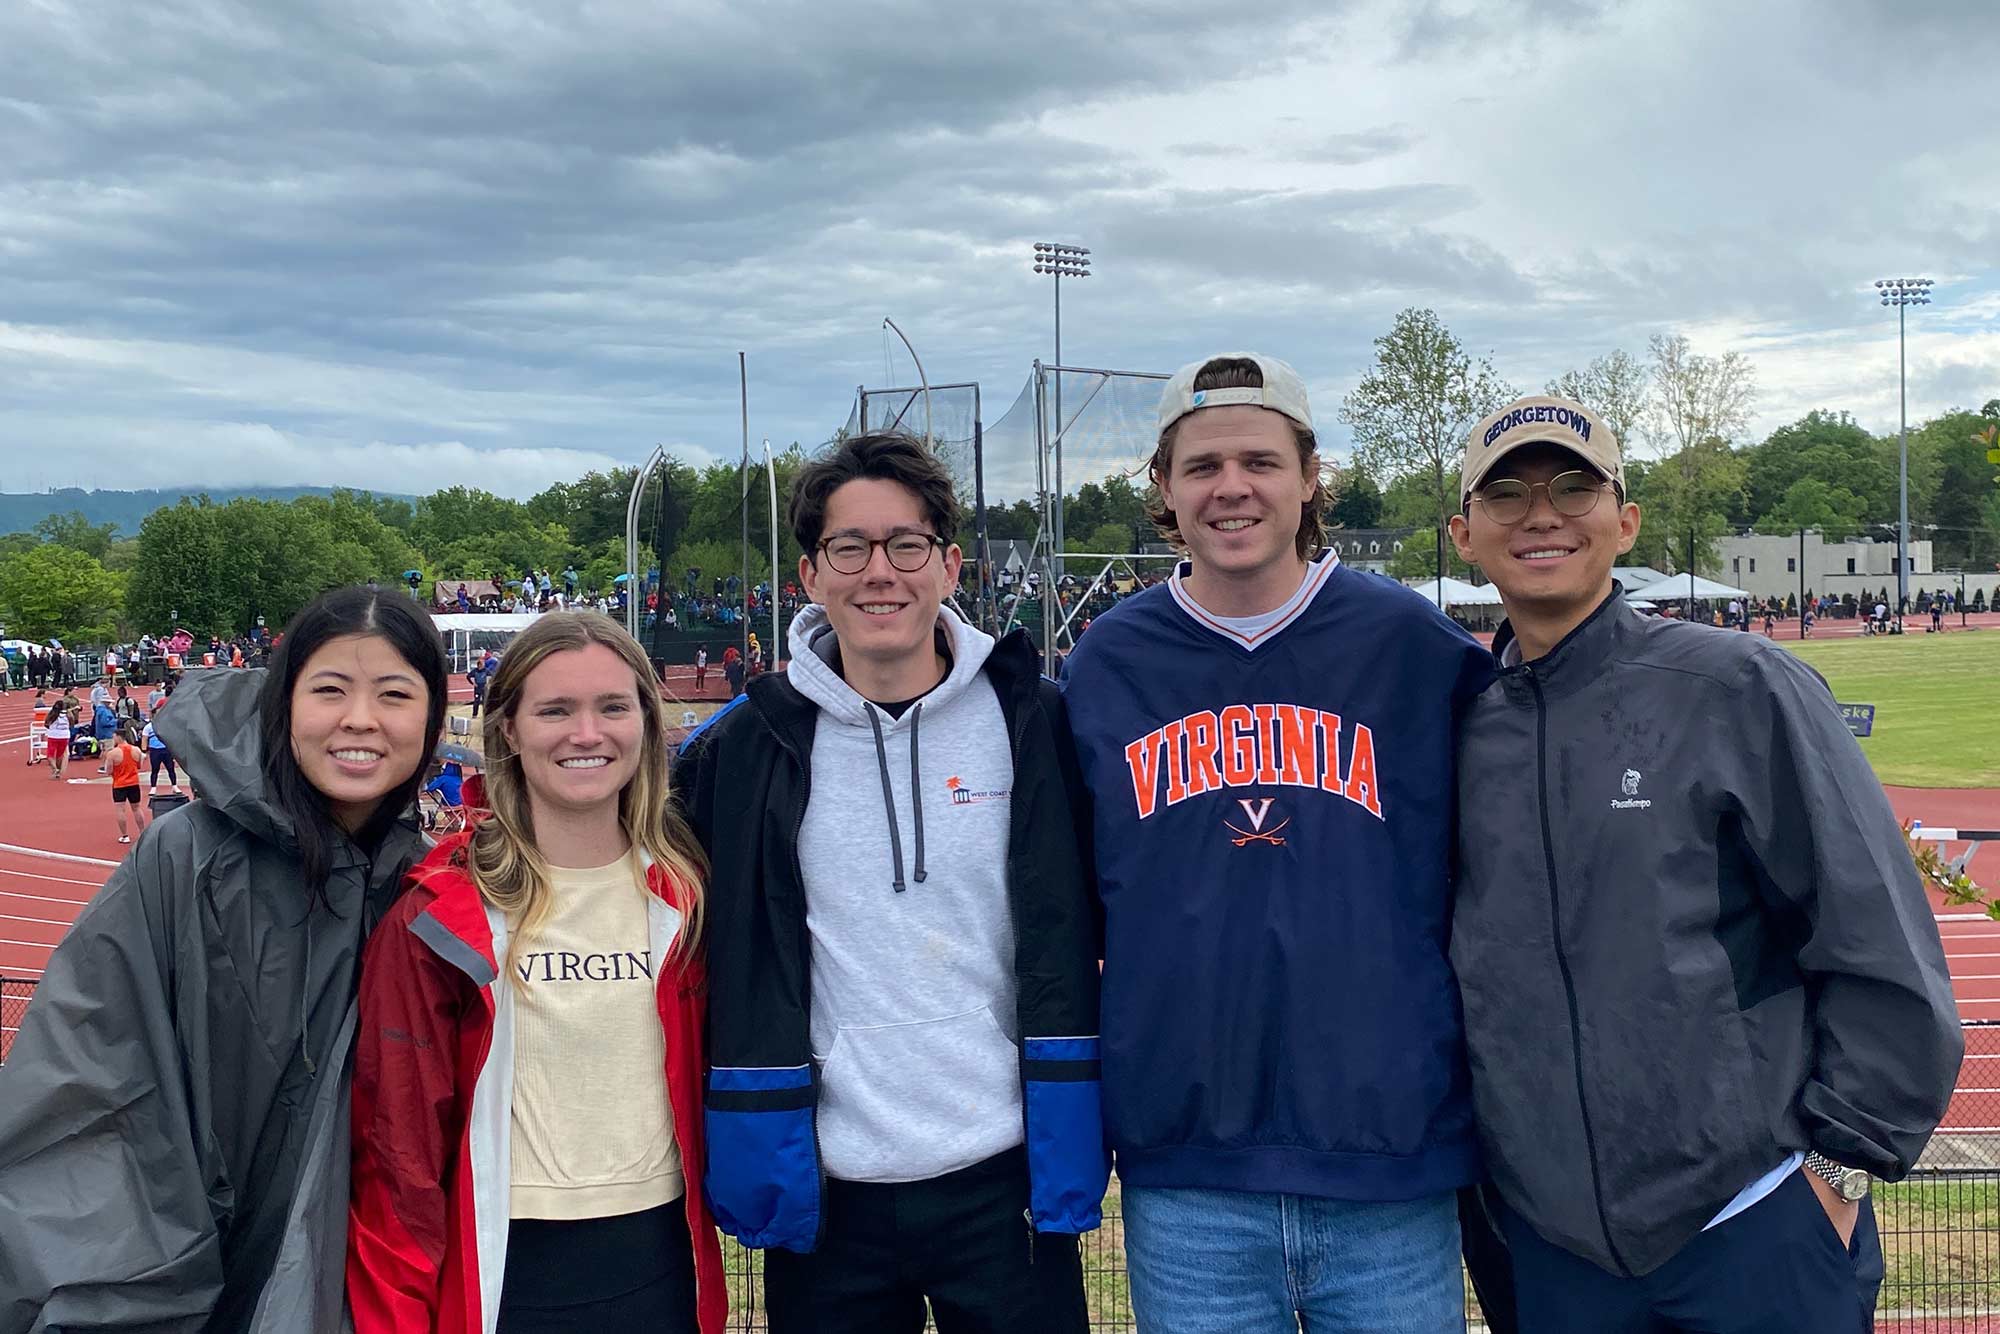 Group portrait of Fun Club members at a track and field event